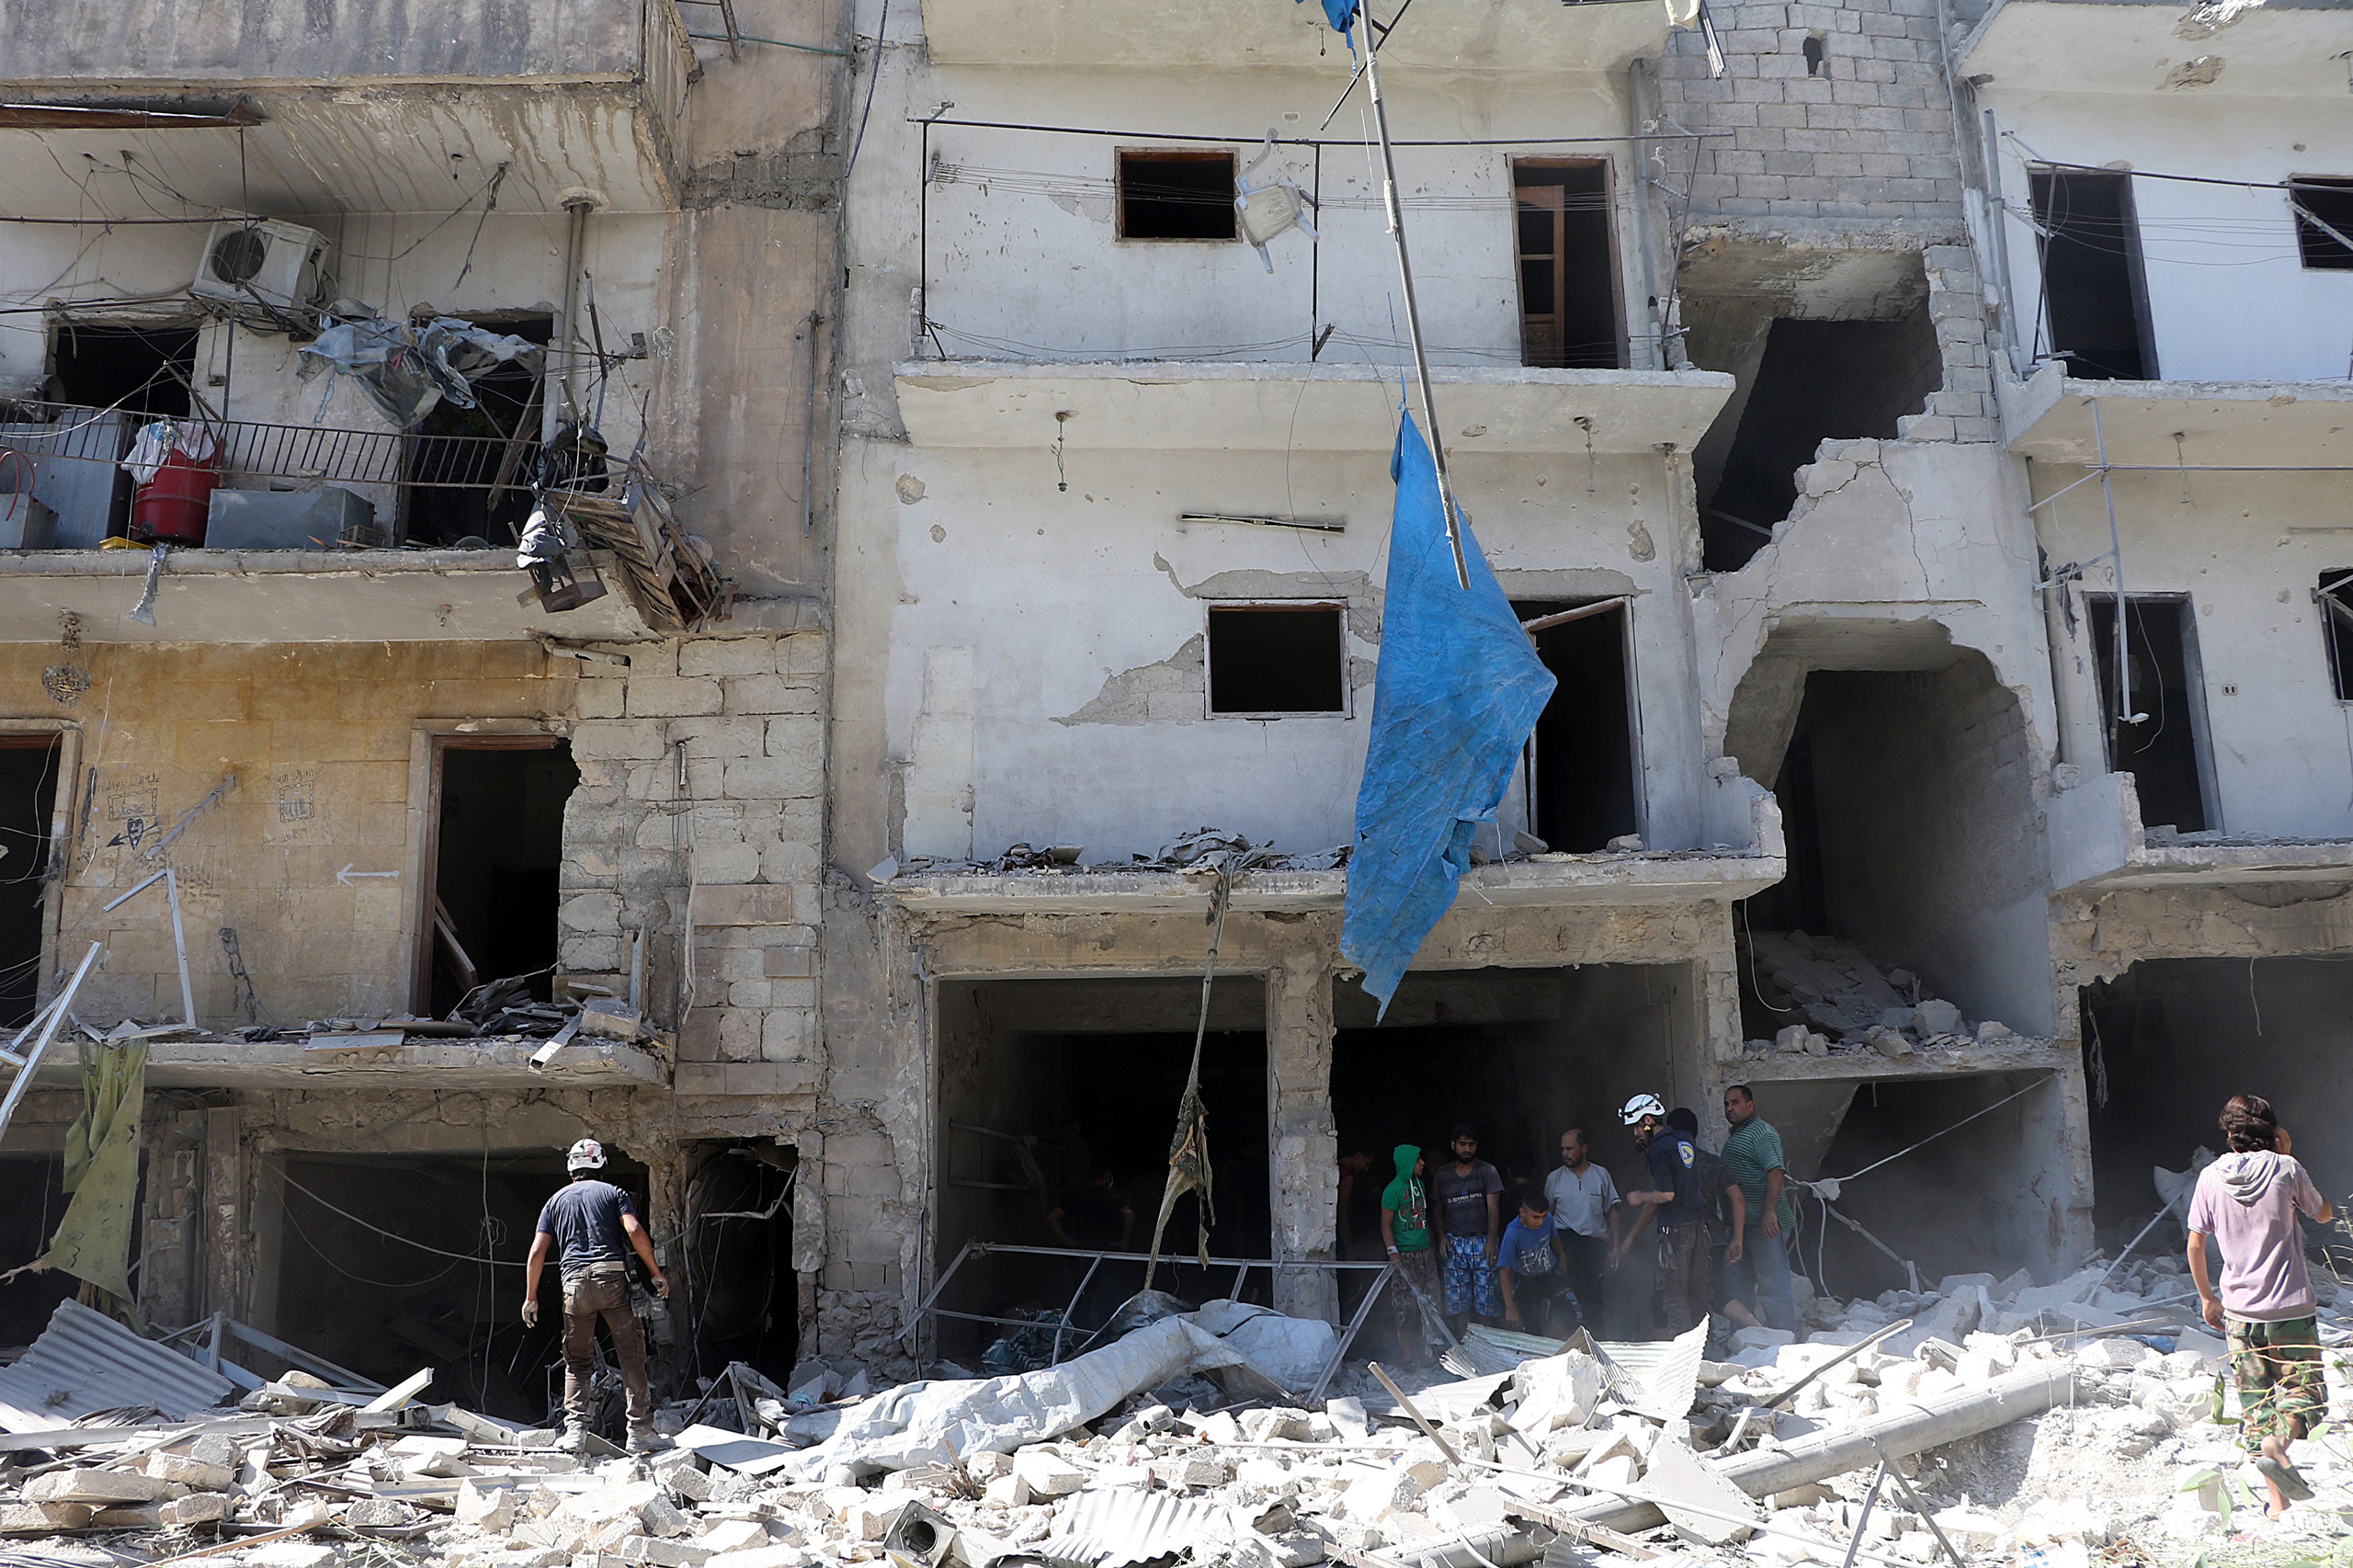 Search and rescue team members inspect the debris of buildings after Russian army aircrafts hit residential areas in the Sukari district of Aleppo, Syria, on Sept. 7, 2016. (Ibrahim Ebu Leys—Anadolu Agency/Getty Images)